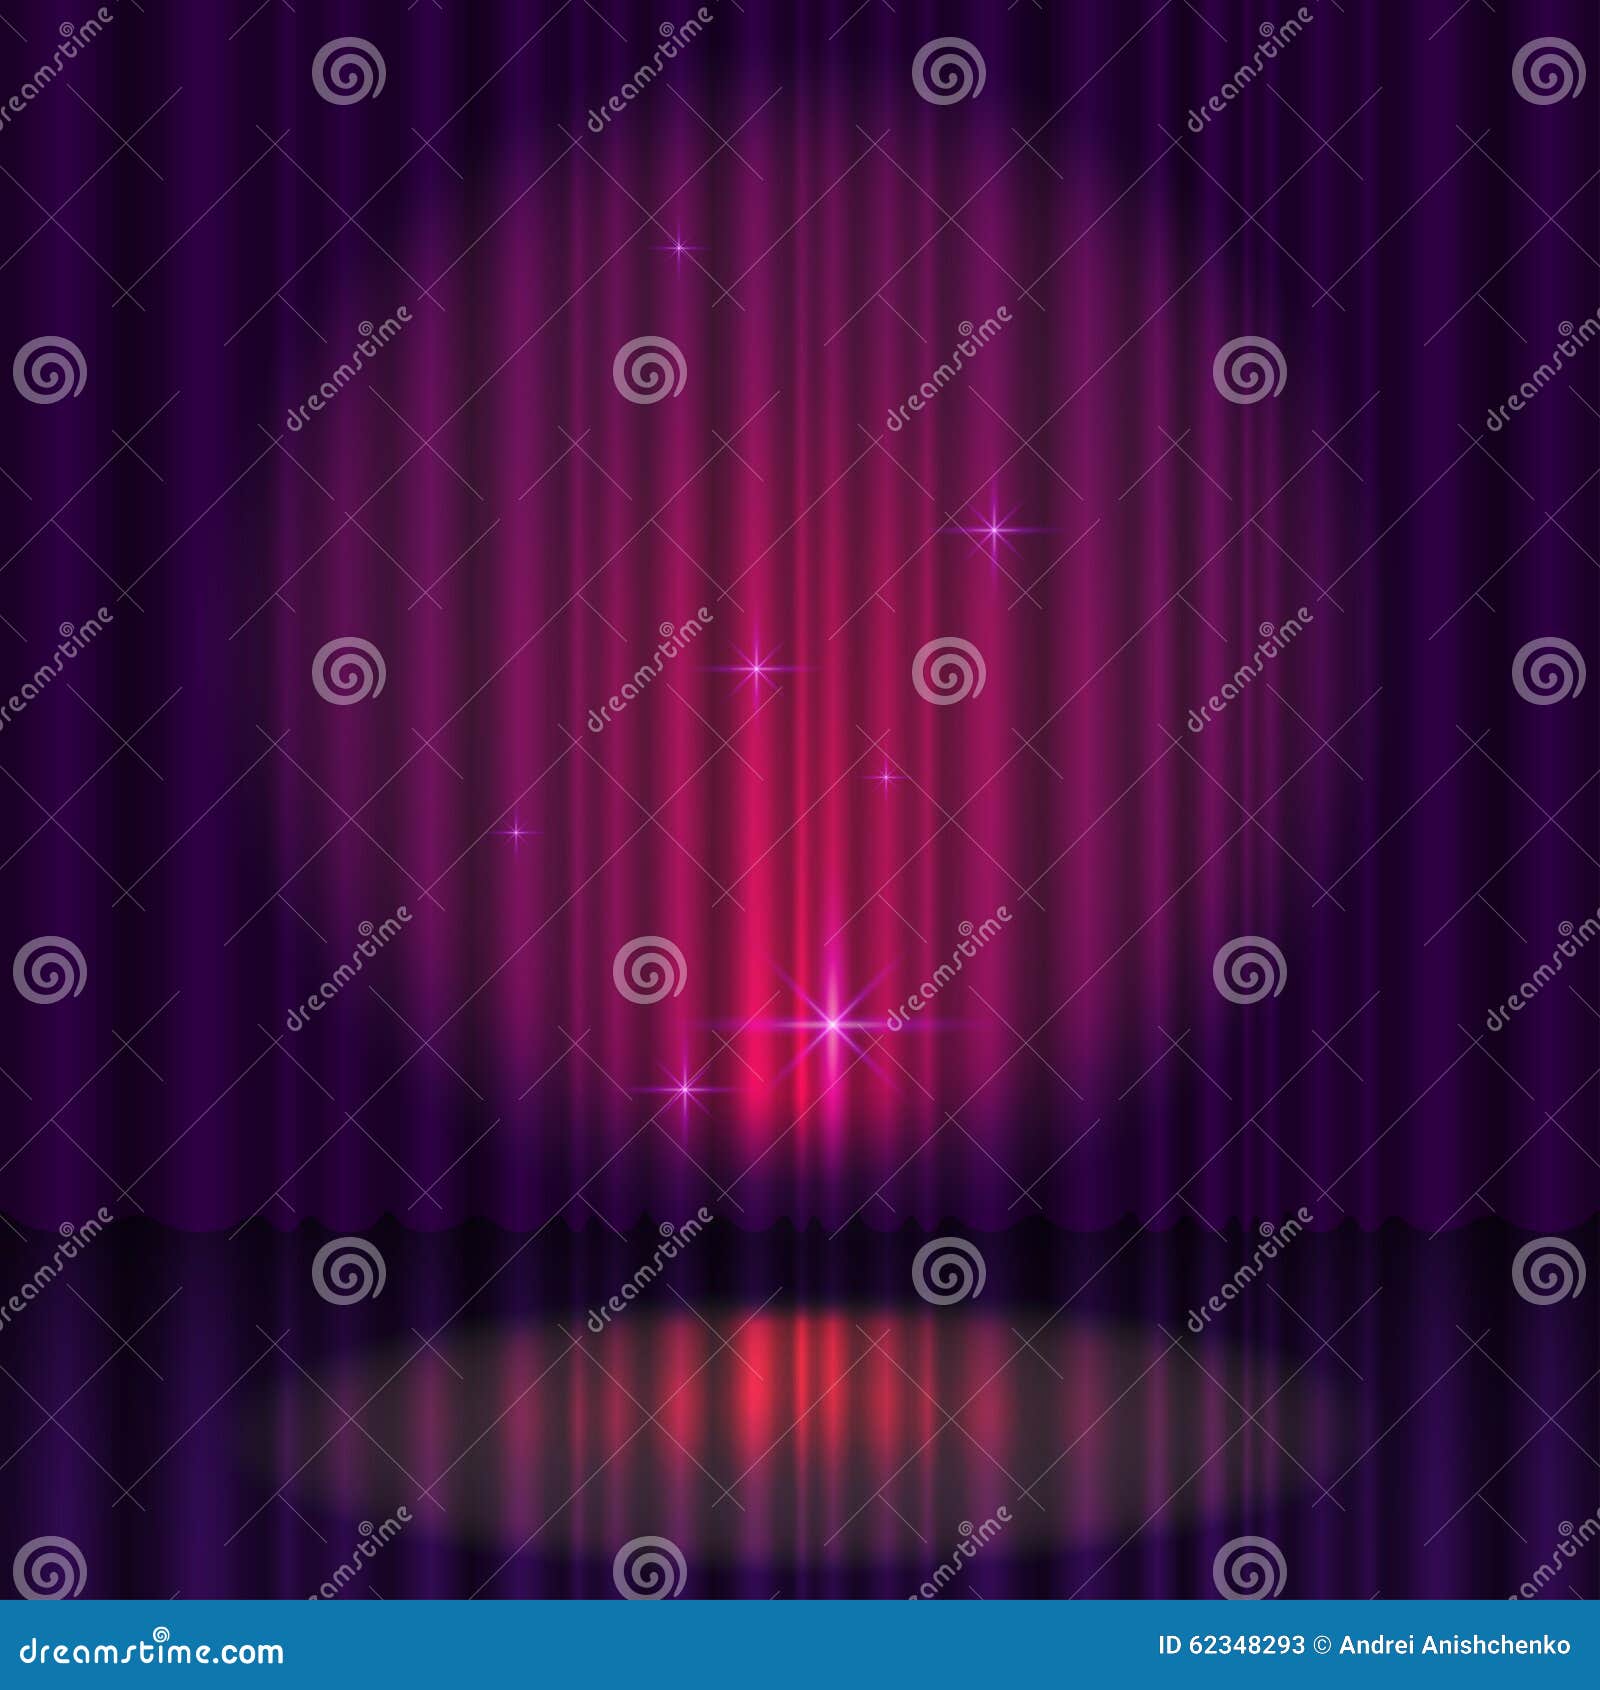 Stage with curtain stock vector. Illustration of broadway - 62348293